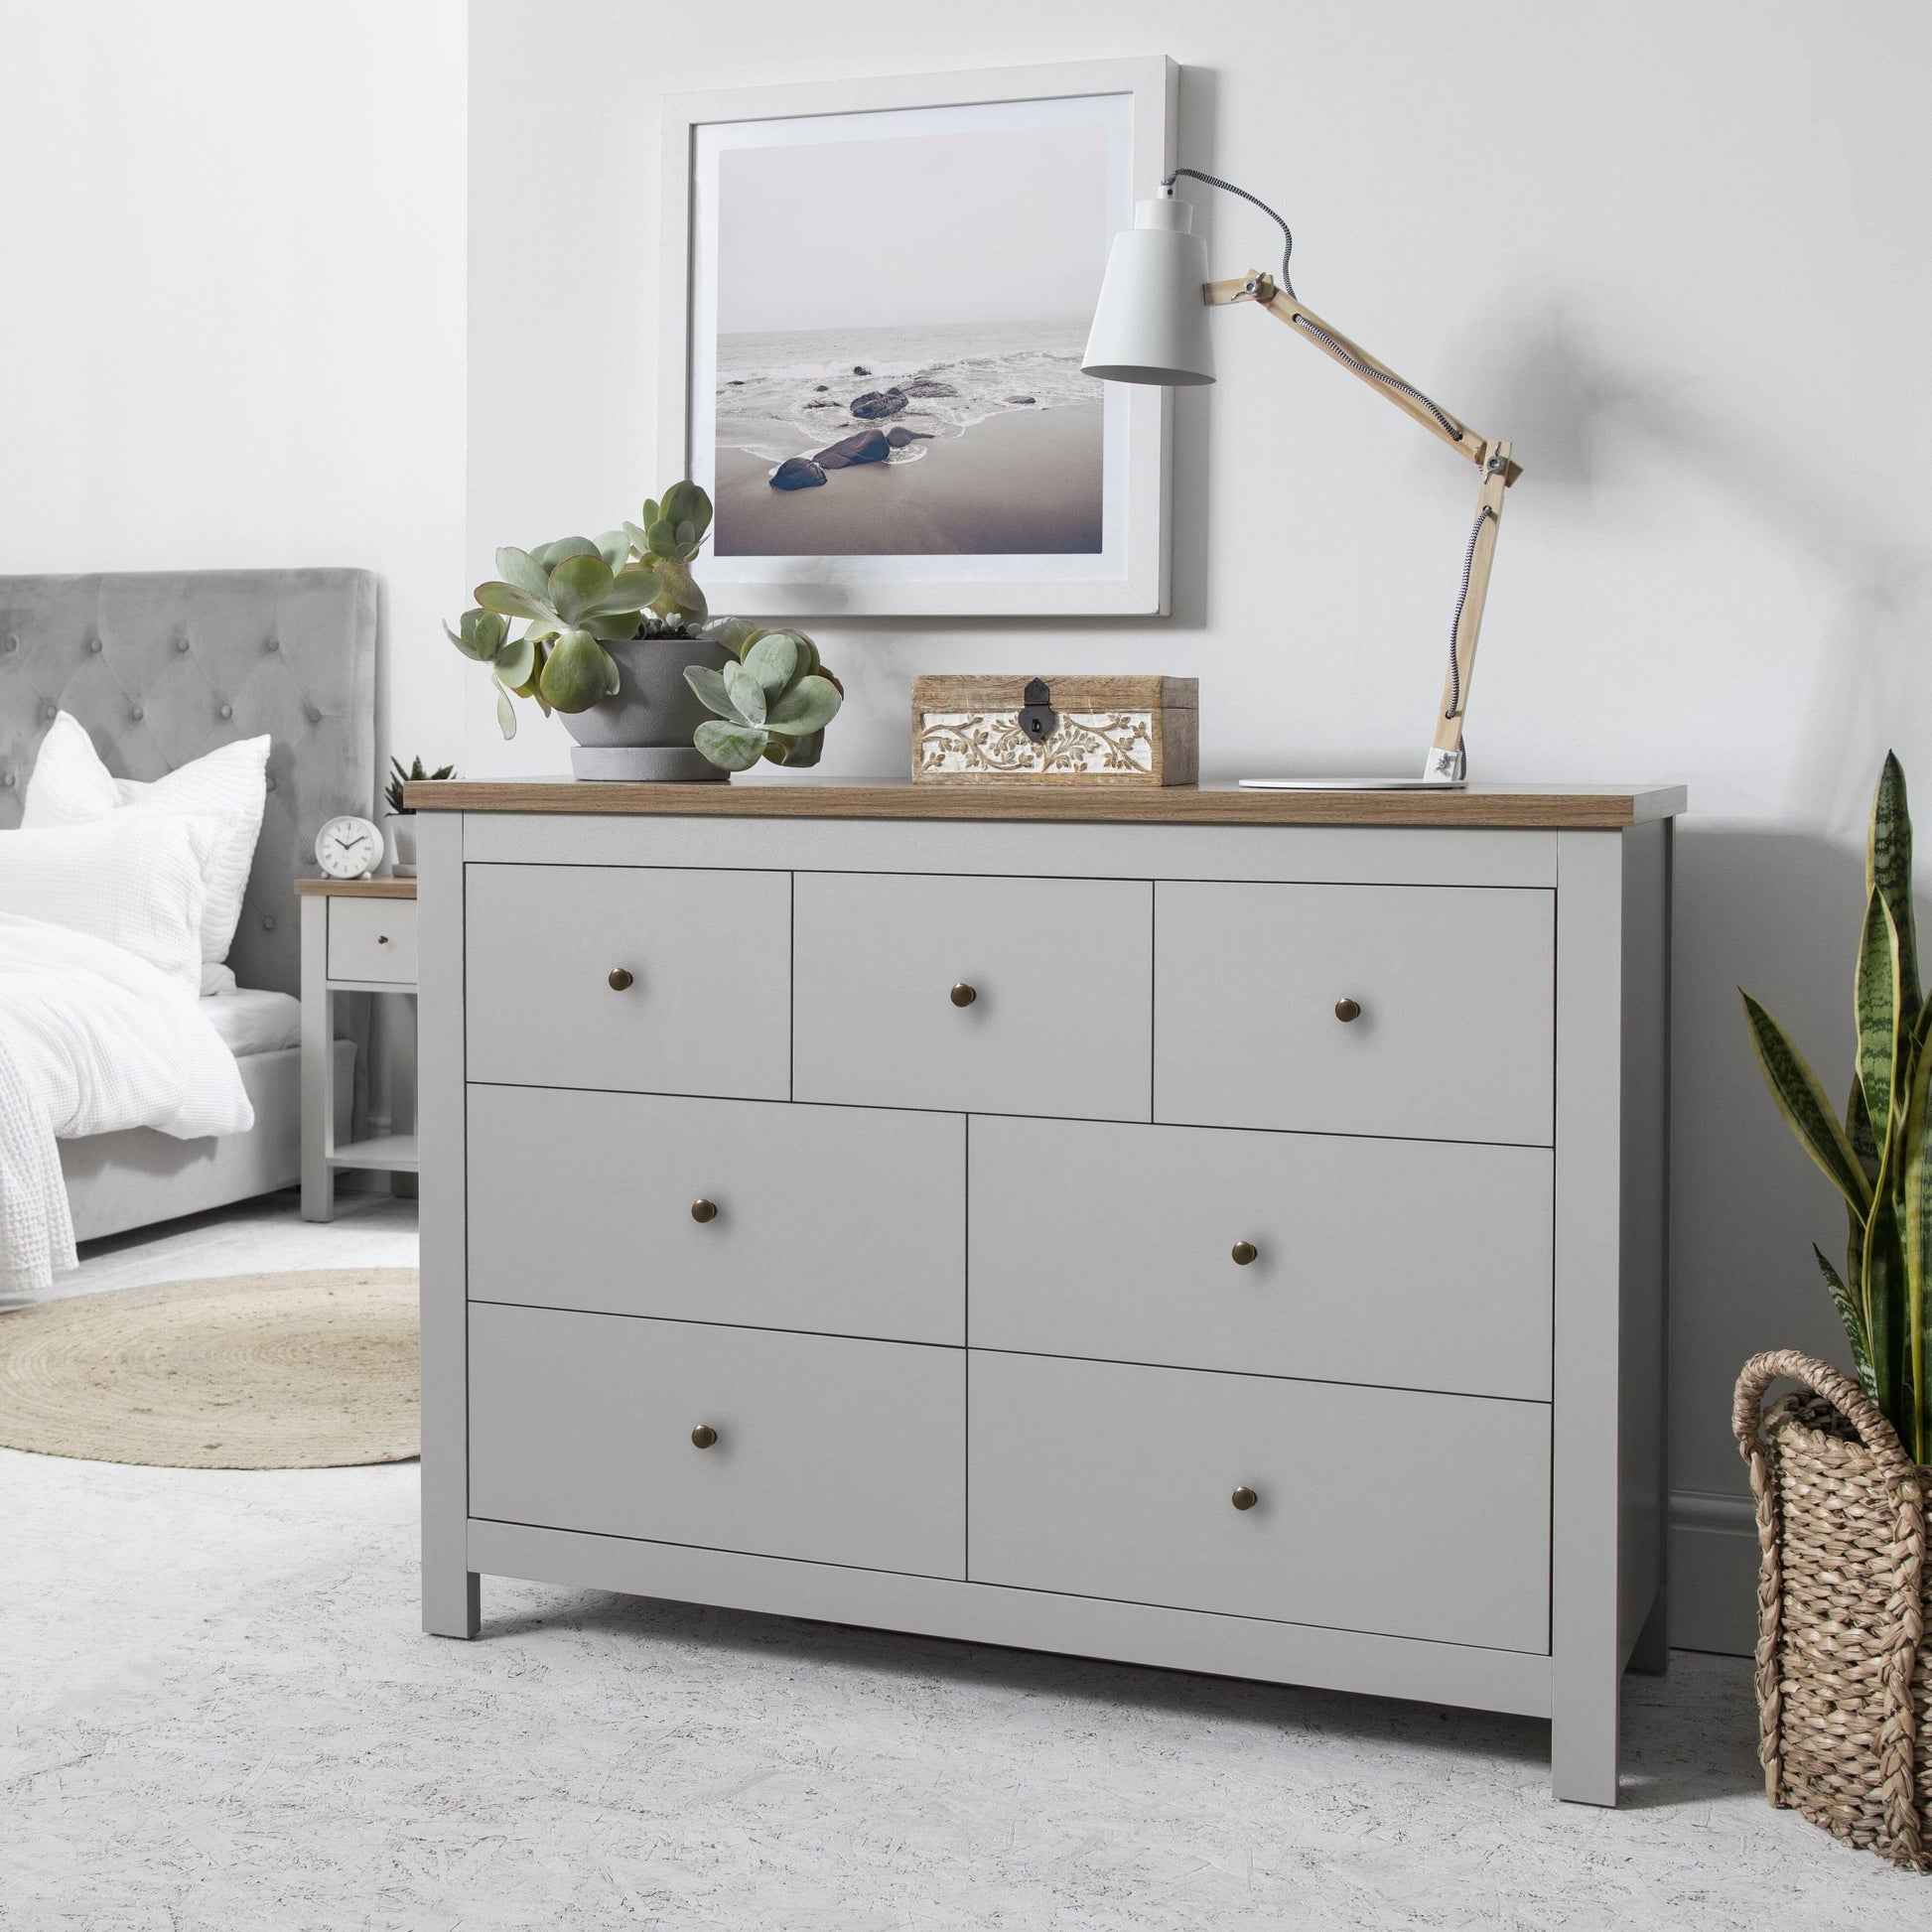 Bampton Grey Bedroom Furniture Set with Chests of Drawers - Laura James